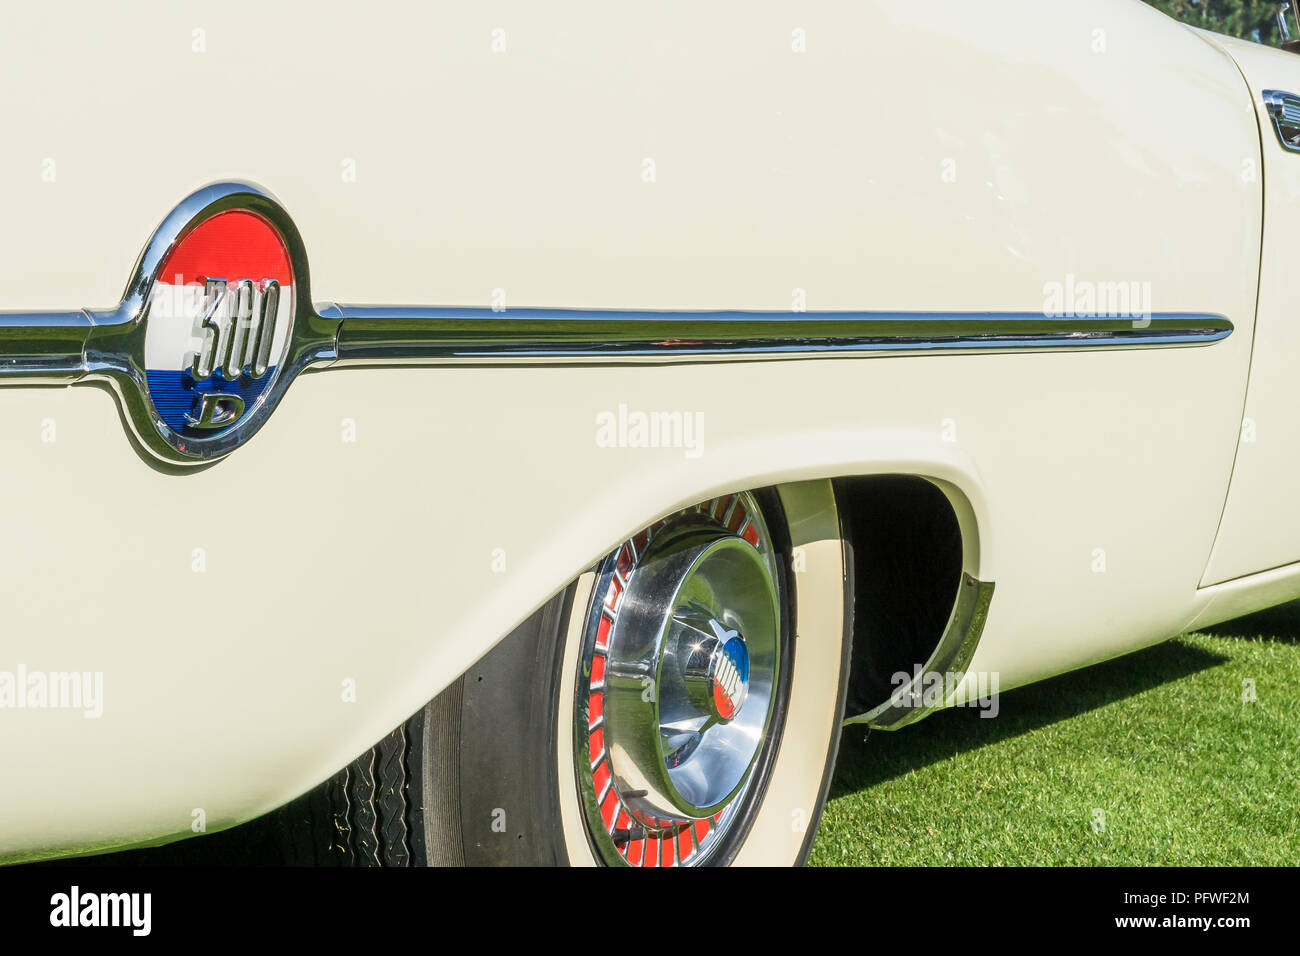 PLYMOUTH, MI/USA - JULY 29, 2018: A 1958 Chrysler 300D trim on display at the Concours d'Elegance of America car show at The Inn at St. John’s. Stock Photo